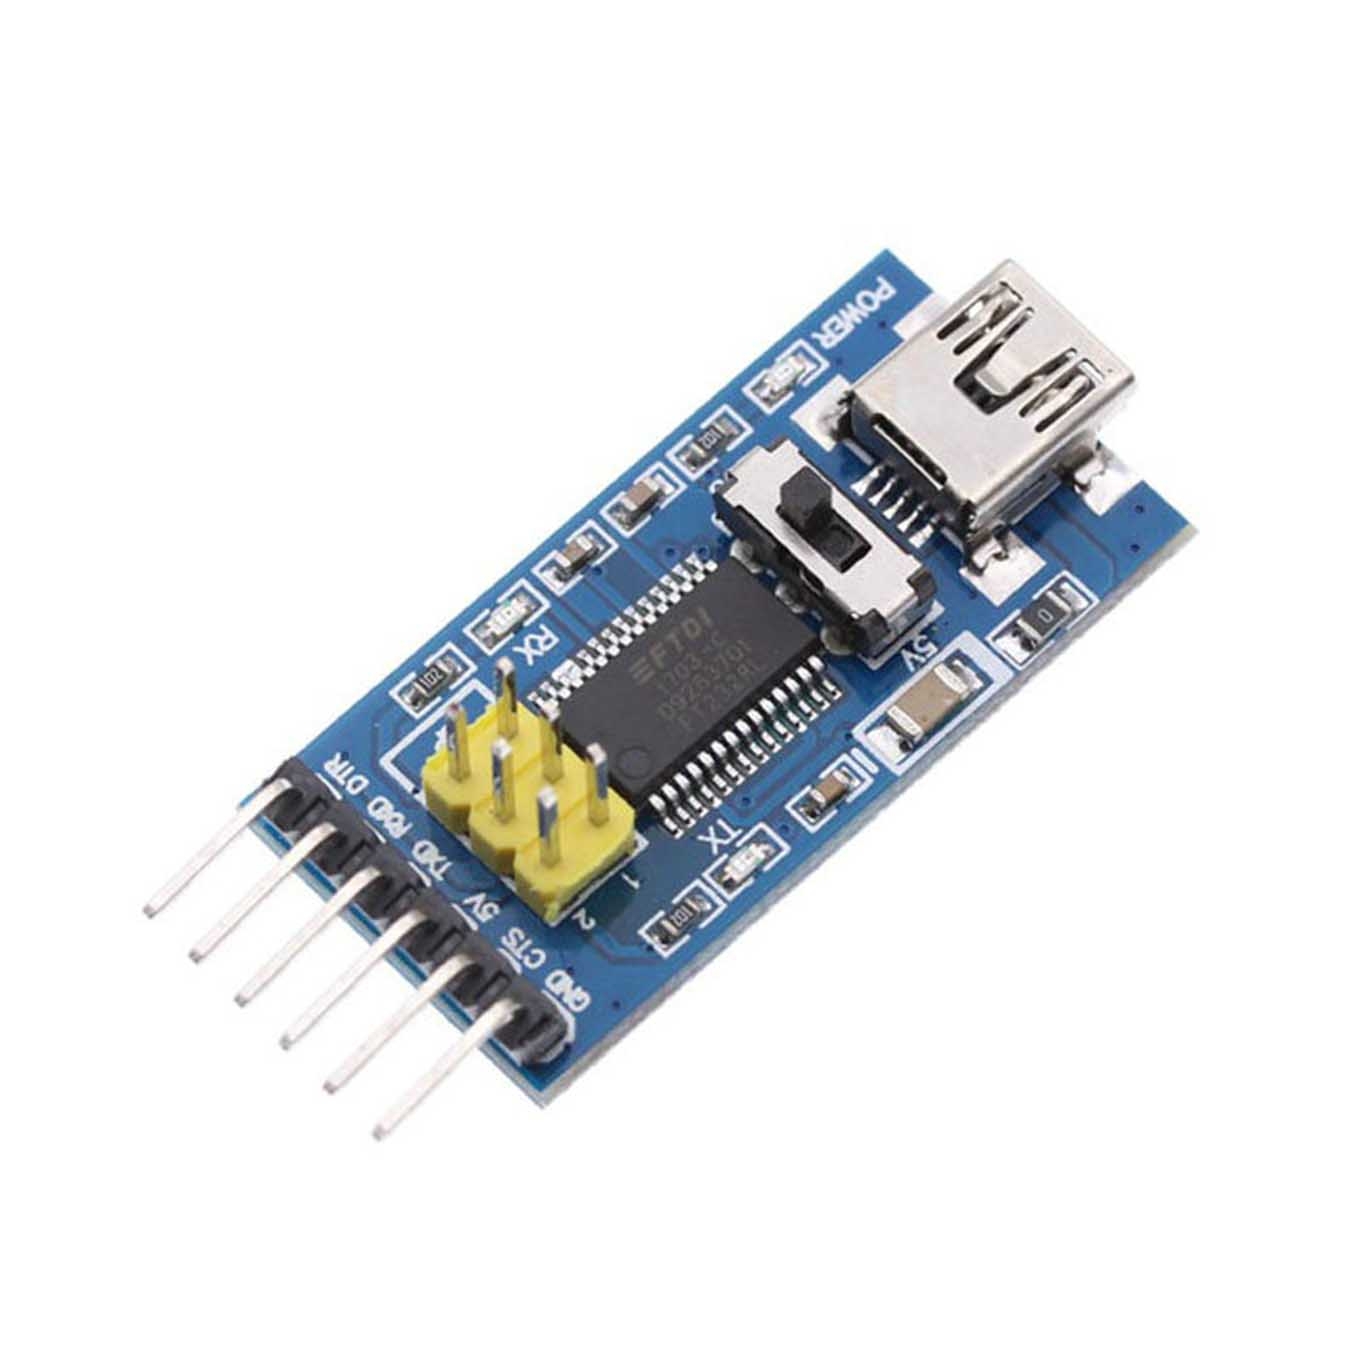 FT232RL USB To TTL Serial IC Adapter Converter Module